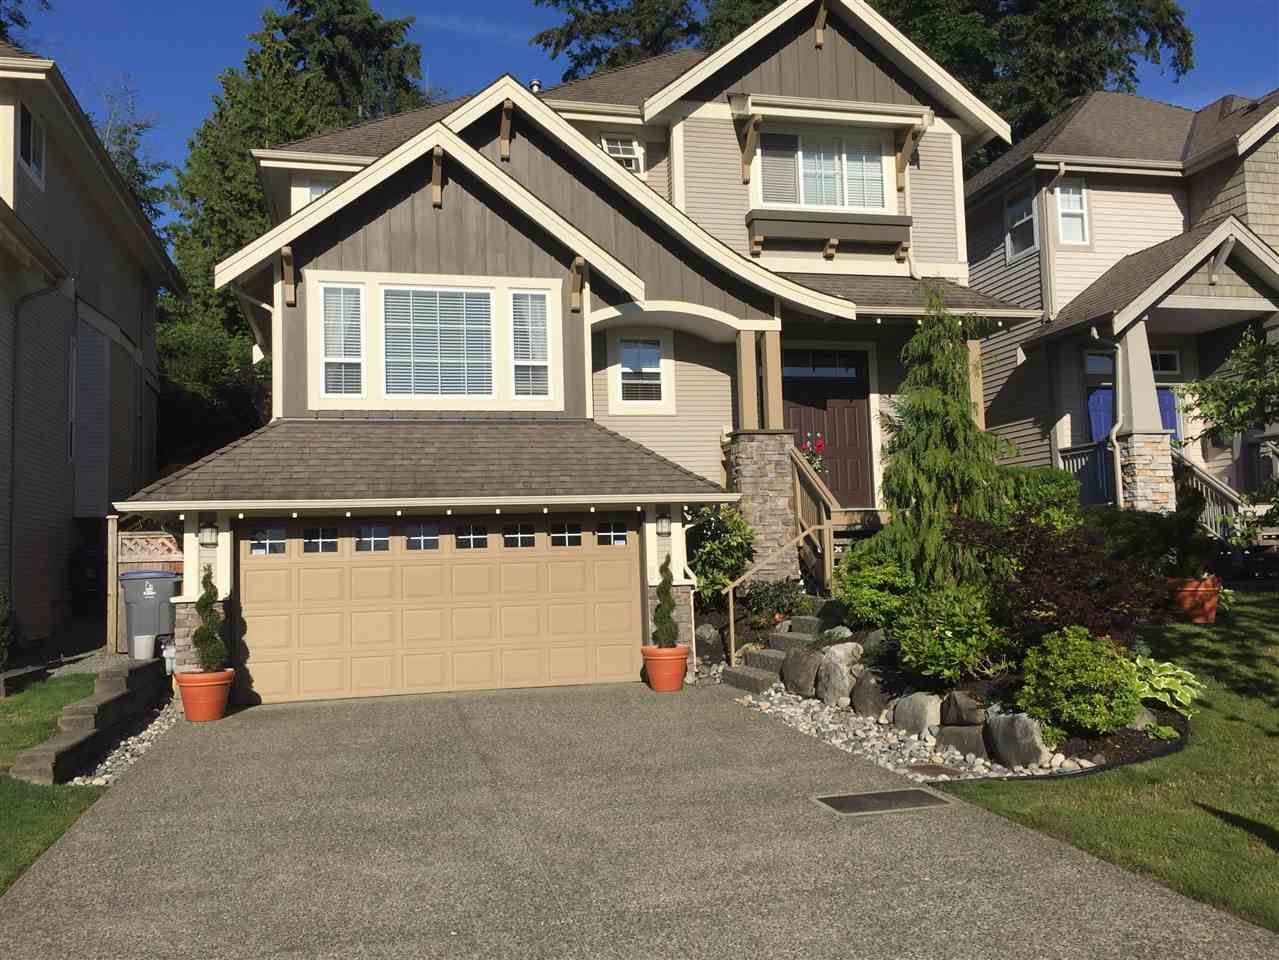 Main Photo: 3377 145A Street in Surrey: Elgin Chantrell House for sale (South Surrey White Rock)  : MLS®# R2078061